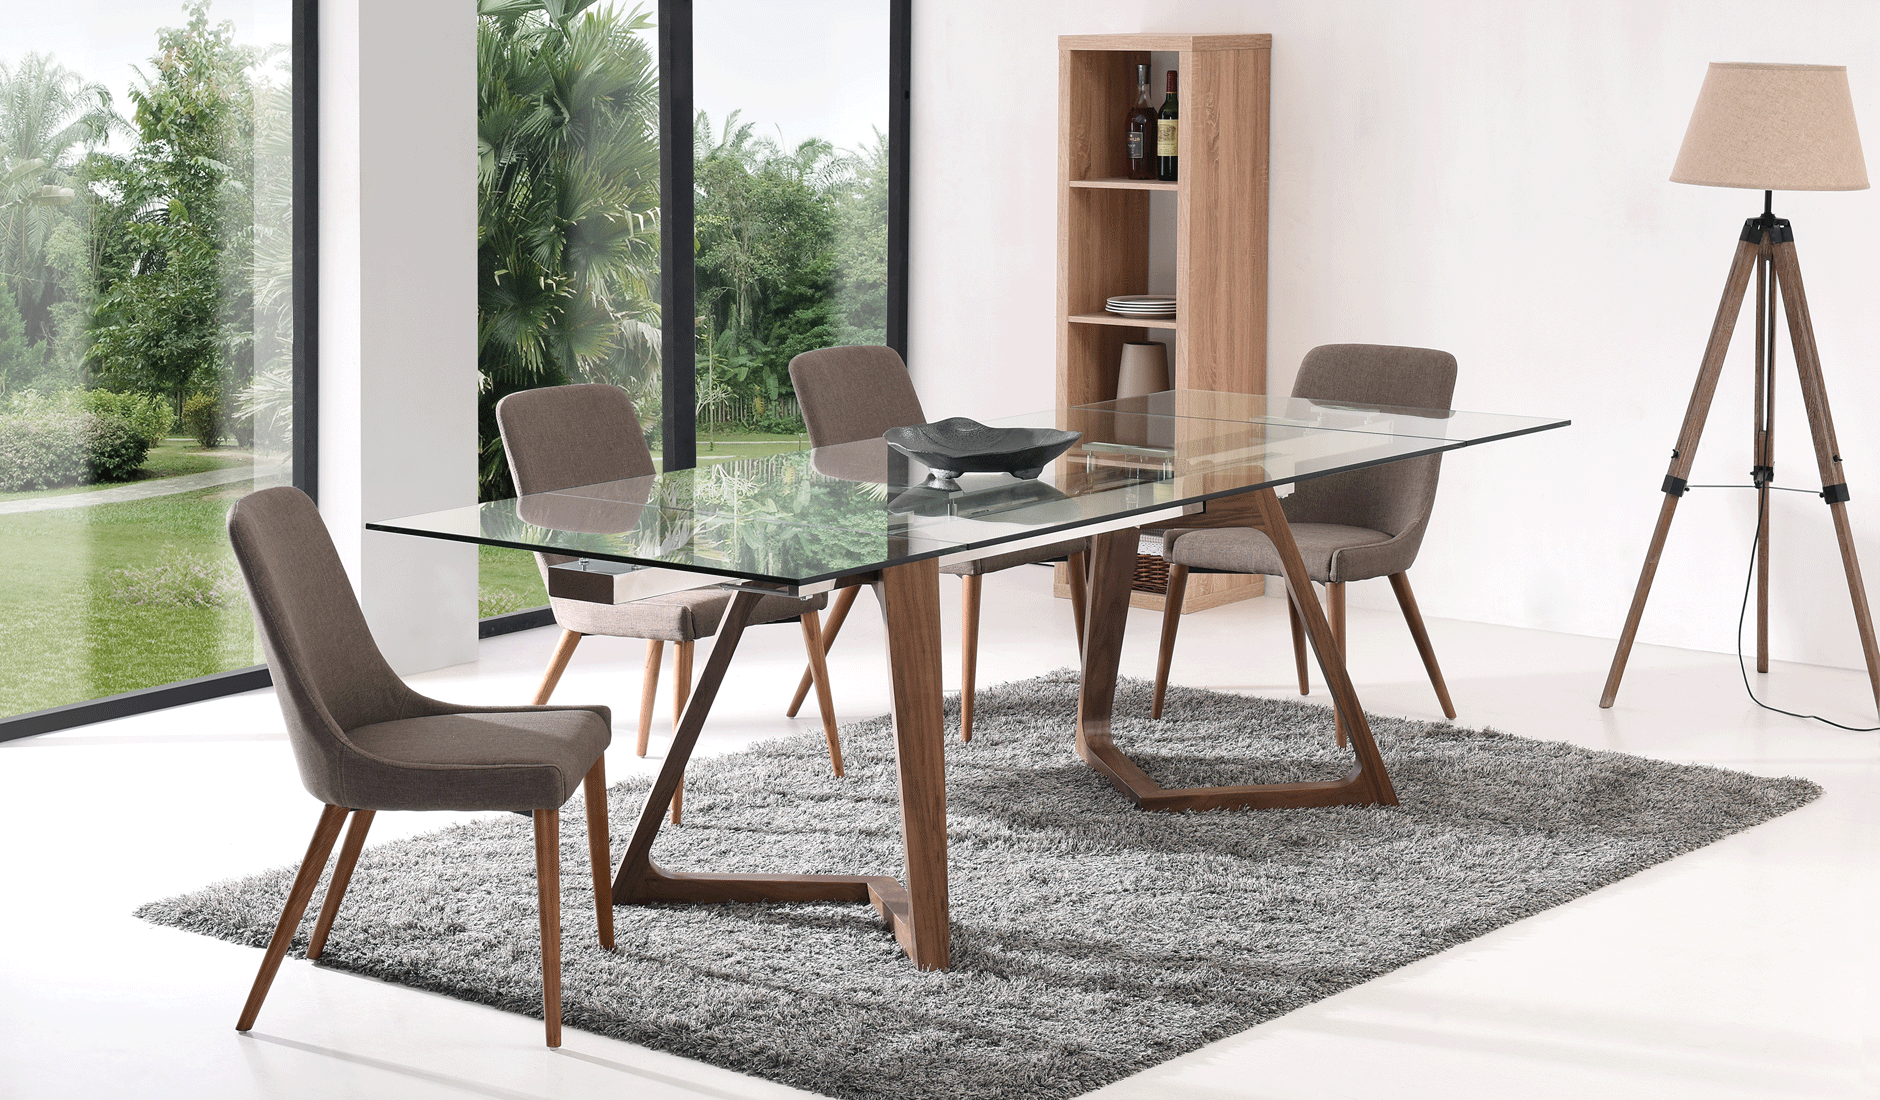 Brands Fama Modern Living Room, Spain 8811 Table and 941 Chairs